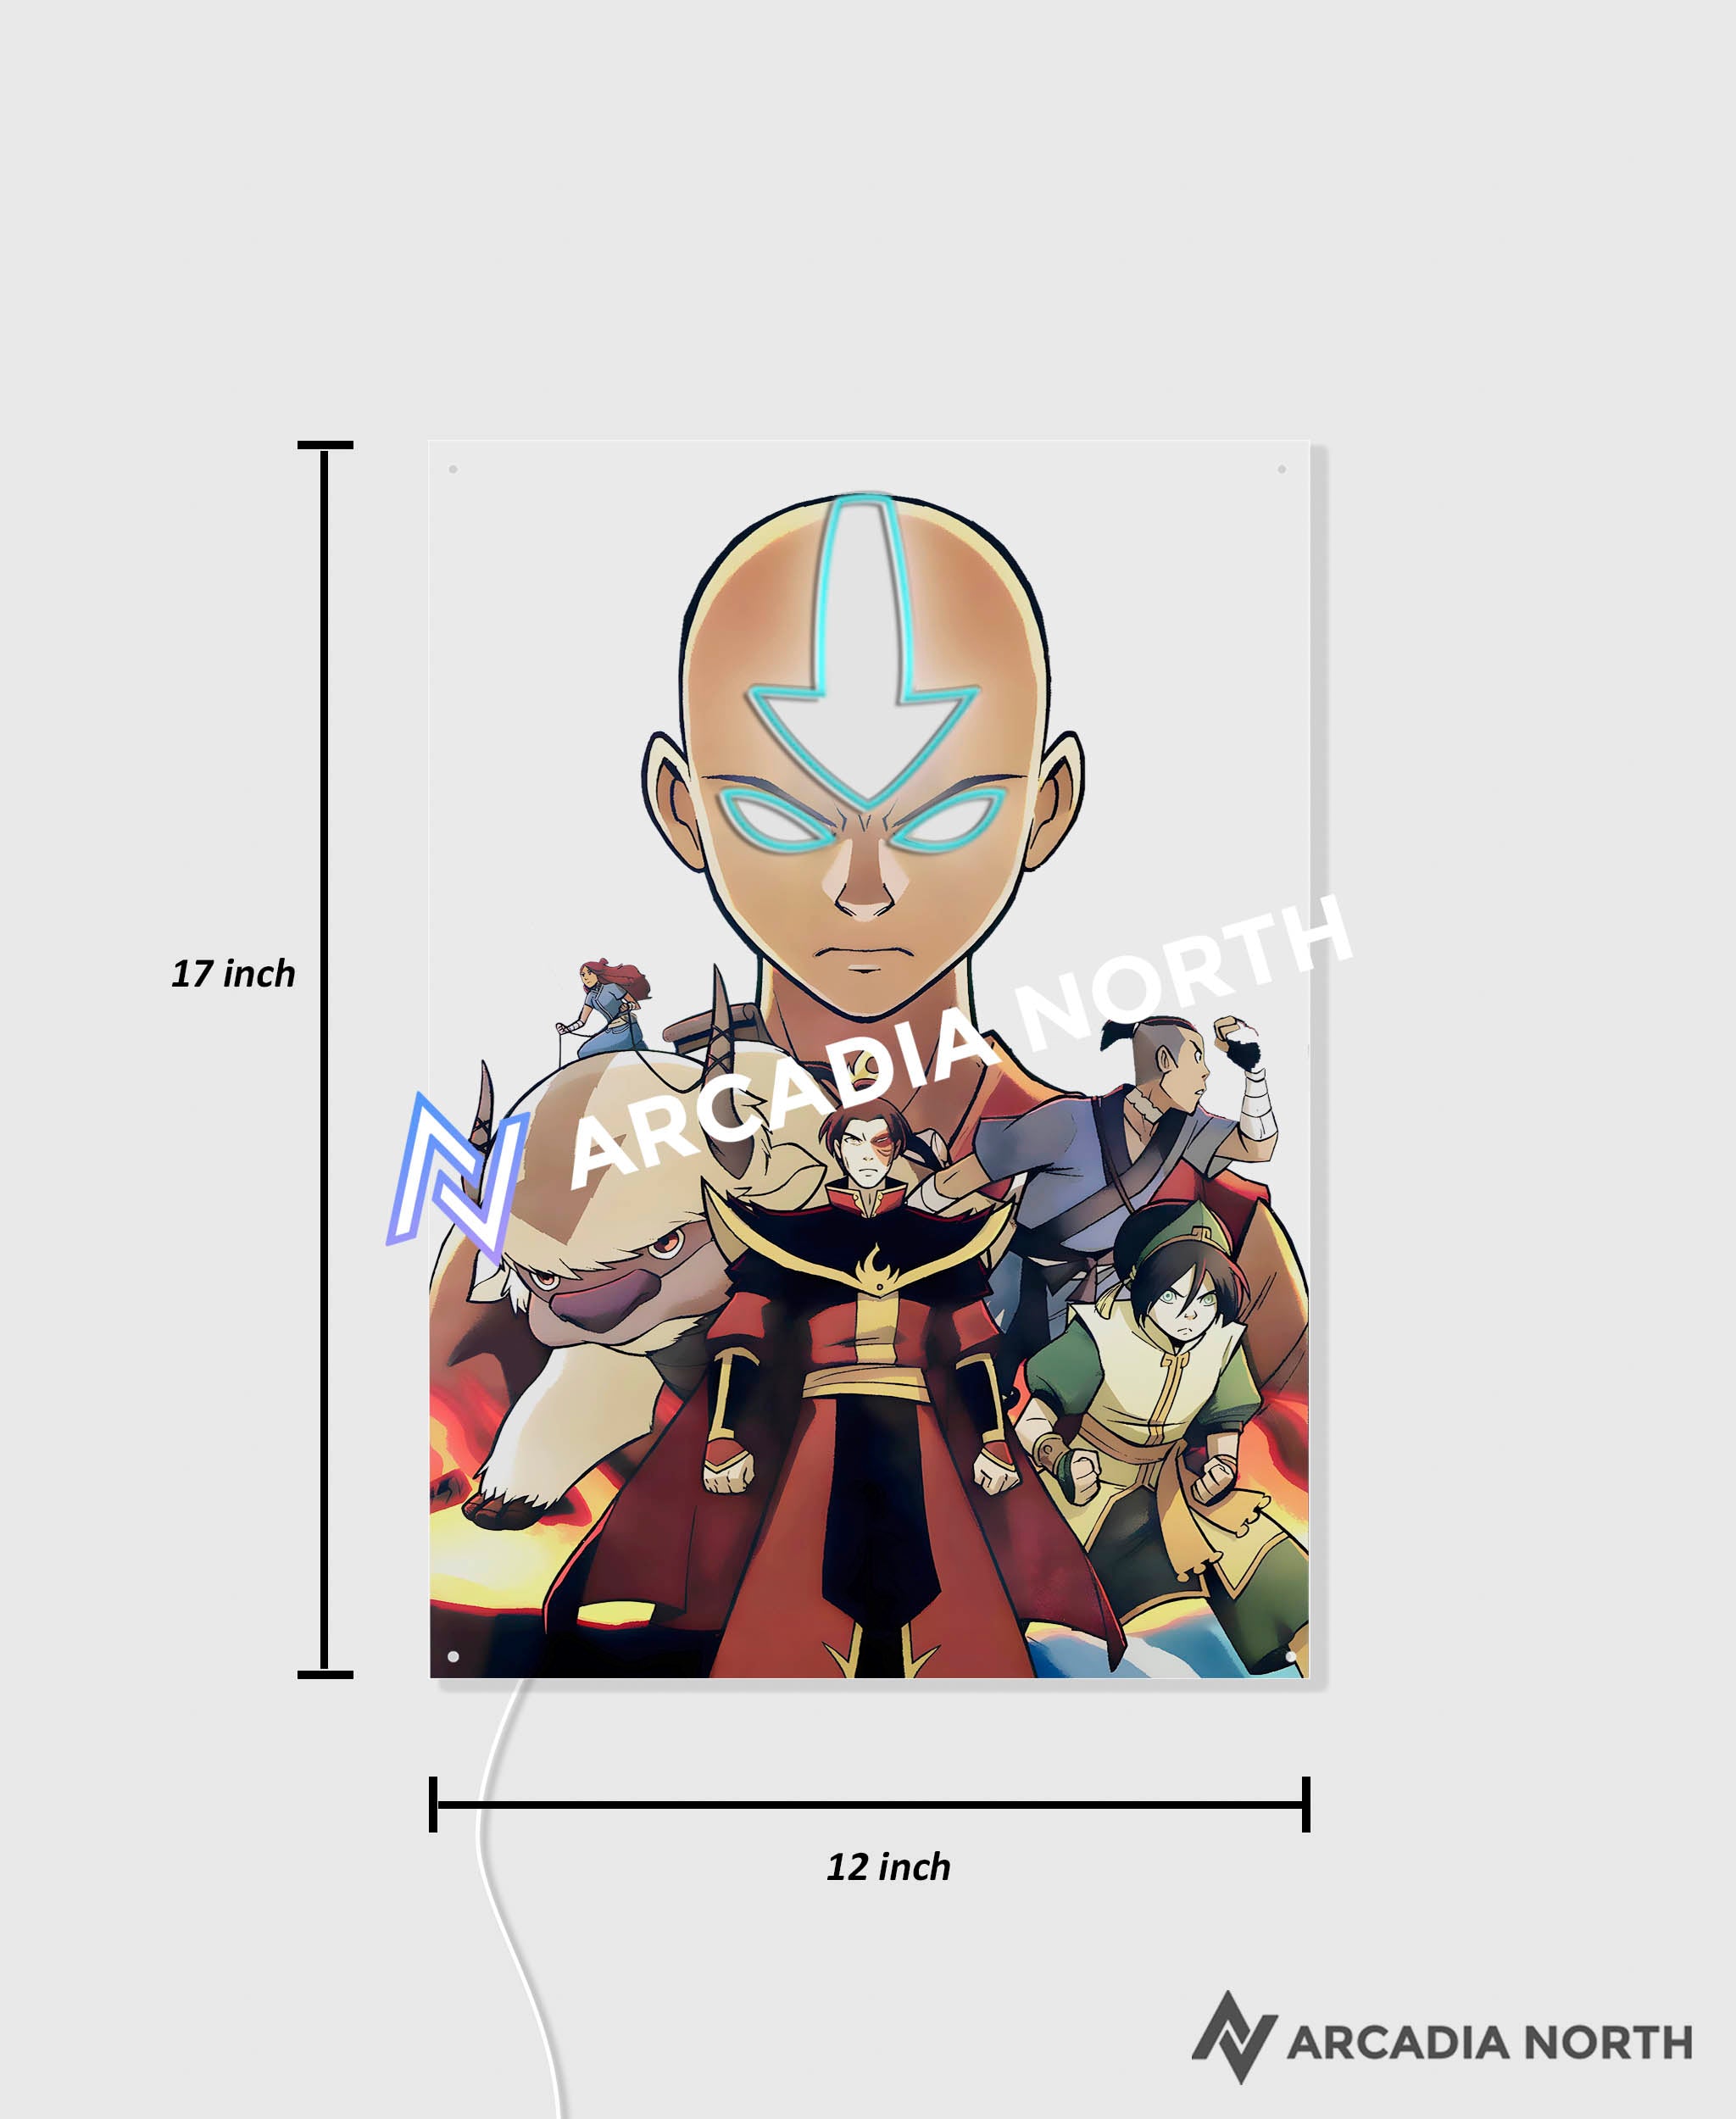 Arcadia North AURALIGHT Original LED Poster featuring the anime Avatar The Last Airbender with Aang, Zuko, Appa, Sokka, Katara, and Toph. Aang and his arrow tattoo are Illuminated by glowing LED neon lights like The Avatar State. UV-printed poster on acrylic.